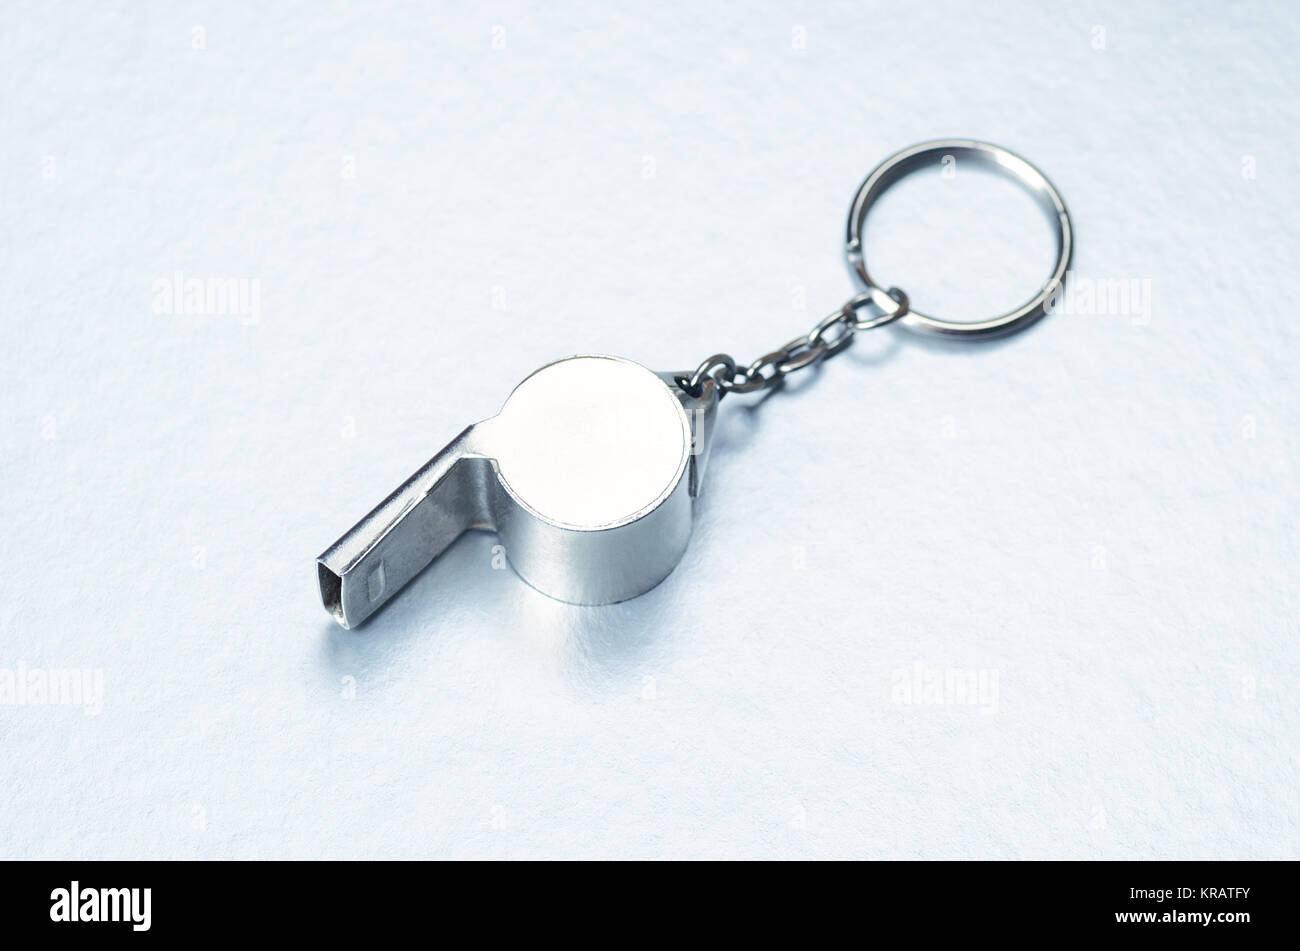 Sports or coaches metal whistle, closeup. Concept refereeing sport on silver ice background. Hockey referee whistle Stock Photo